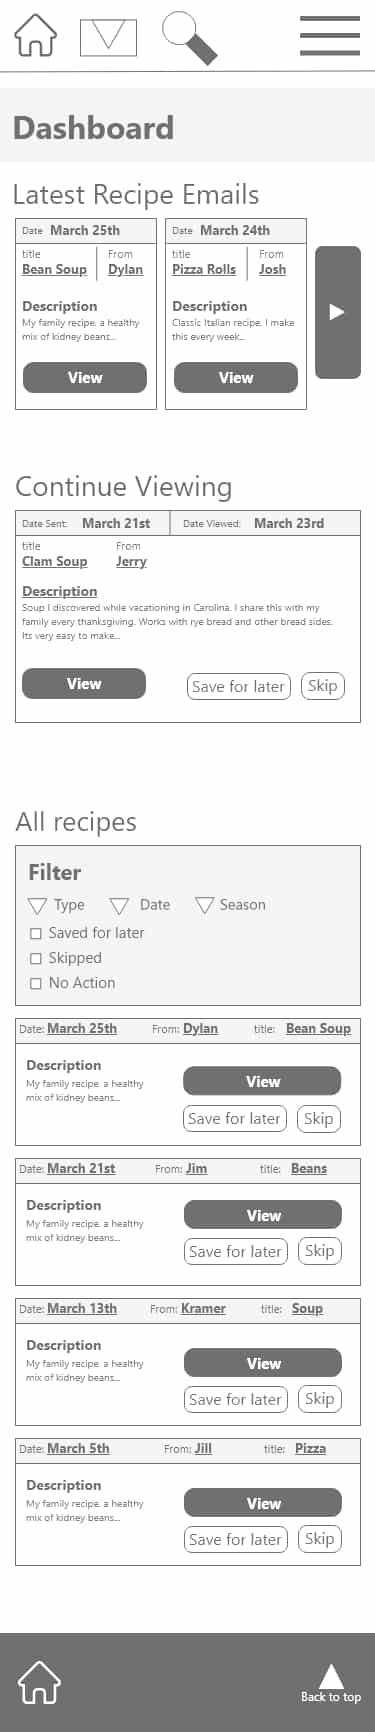 A web page dashboard, a WireFrame with no colors besides white and gray. Sections of webpage include latest recipes, continue viewing,and all recipes.